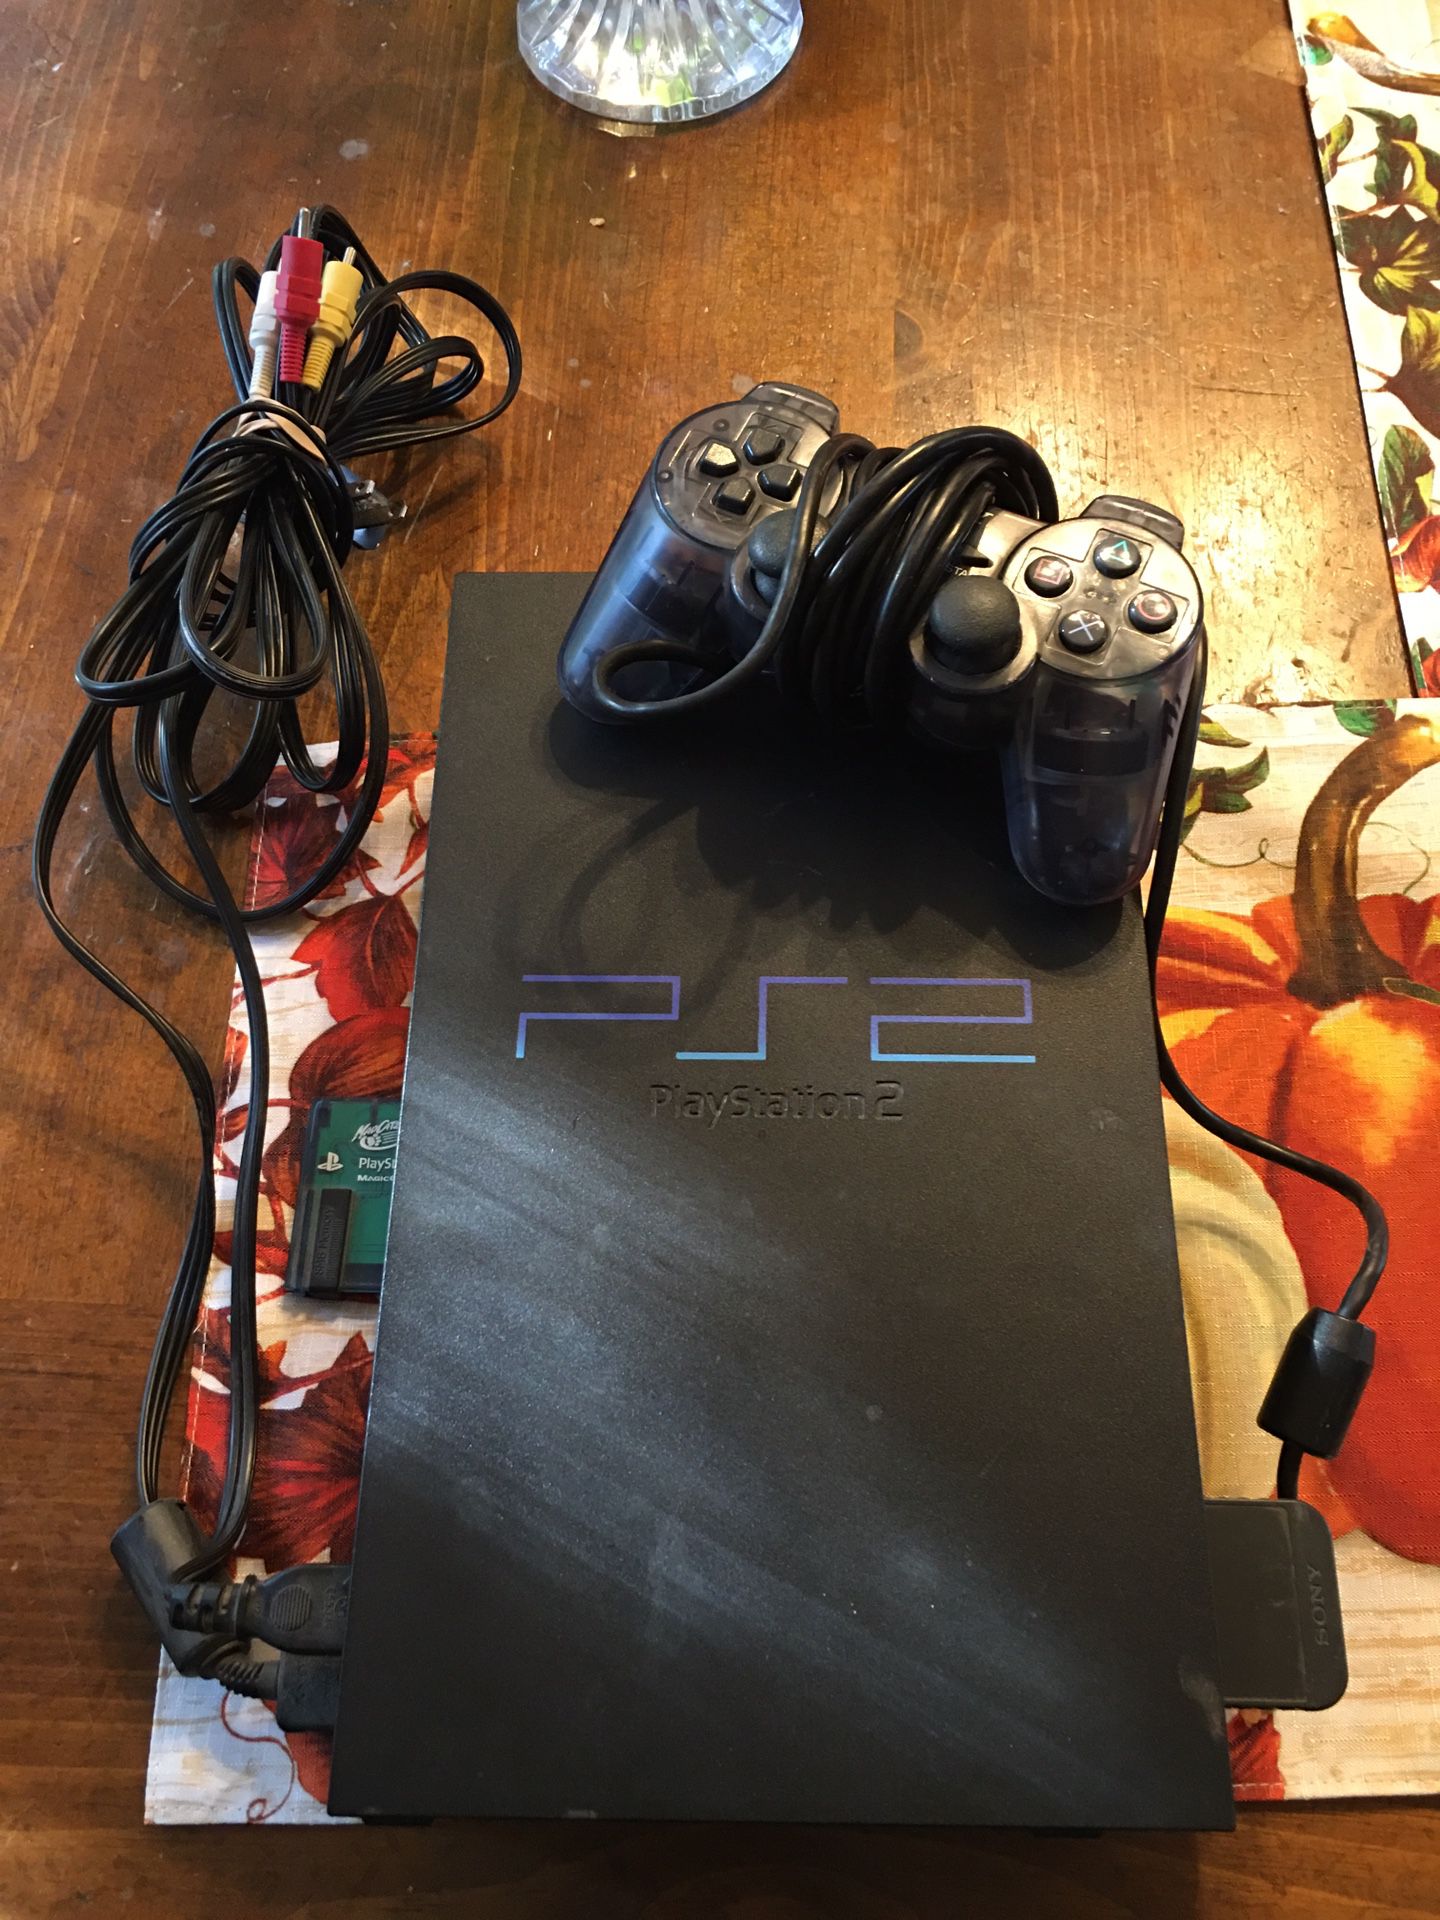 PlayStation2 with game